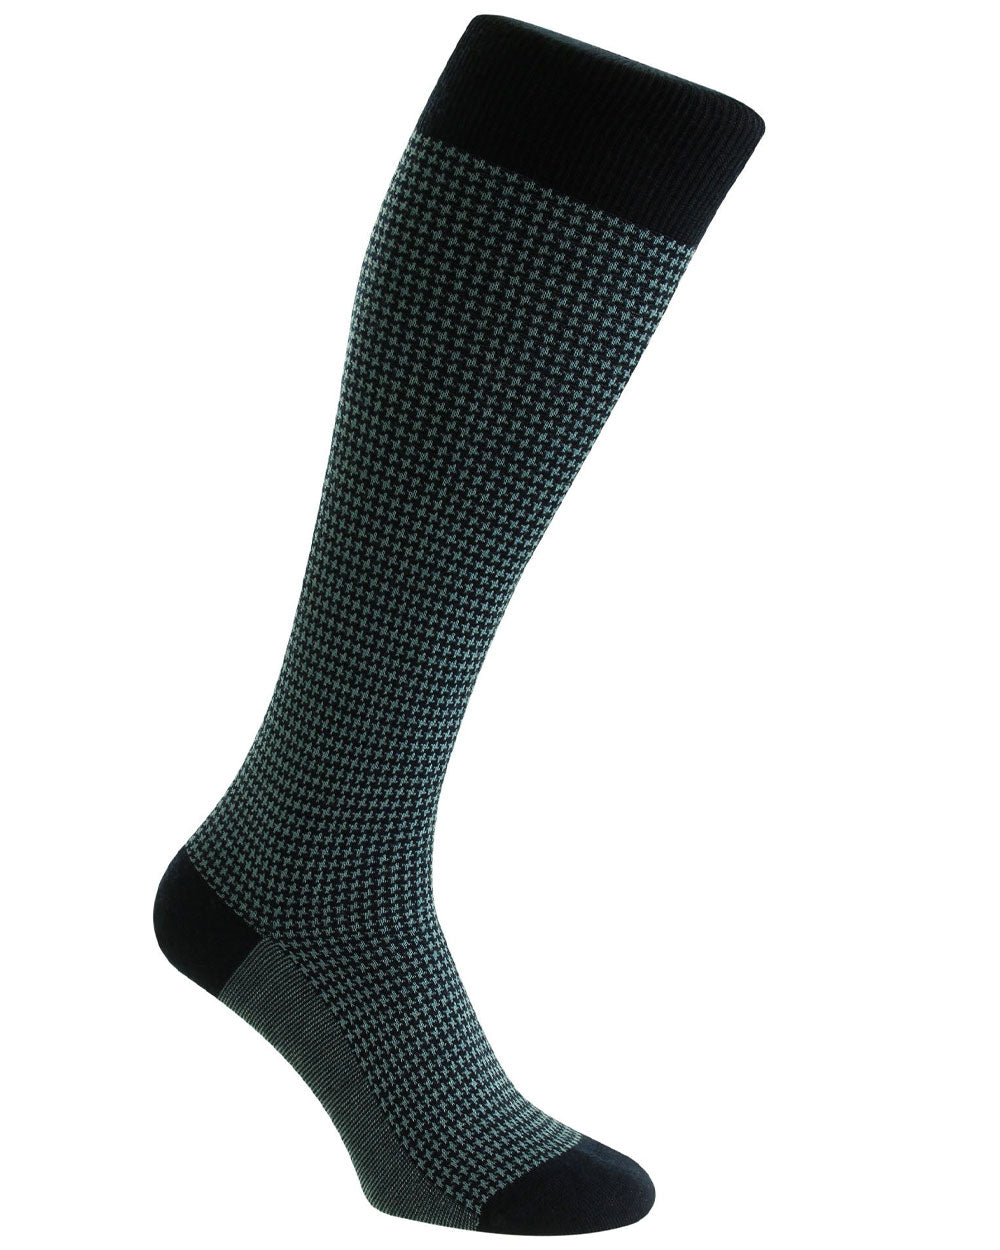 Houndstooth Over the Calf Socks in Navy